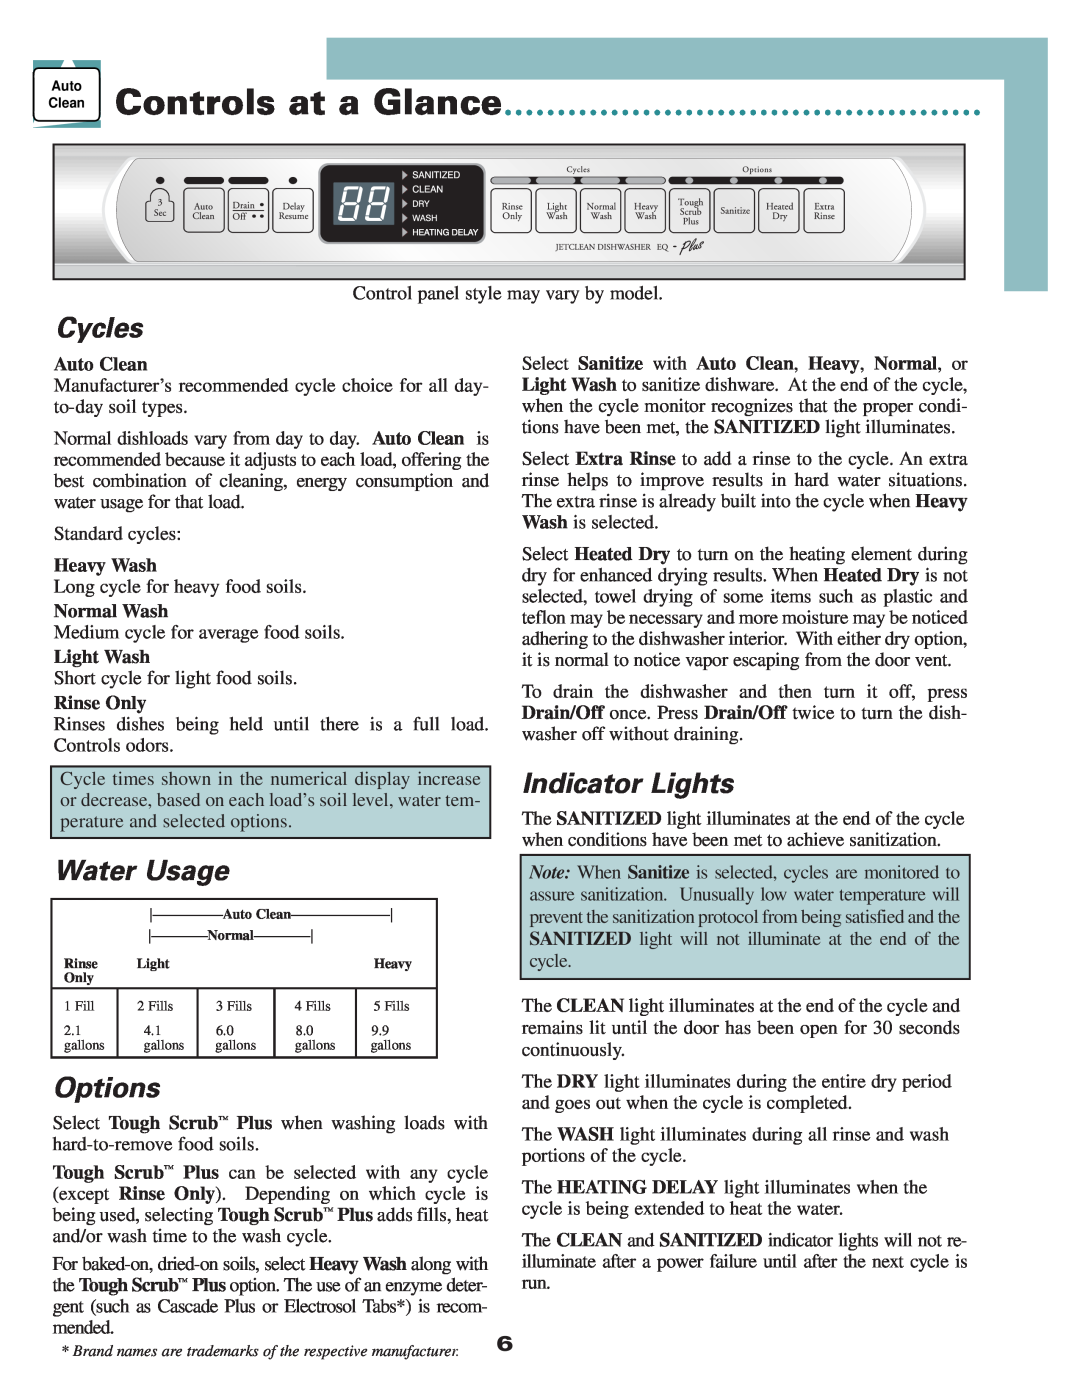 Maytag 6 915928 A Clean Controls at a Glance, Cycles, Water Usage, Options, Indicator Lights, Auto Clean, Heavy Wash 